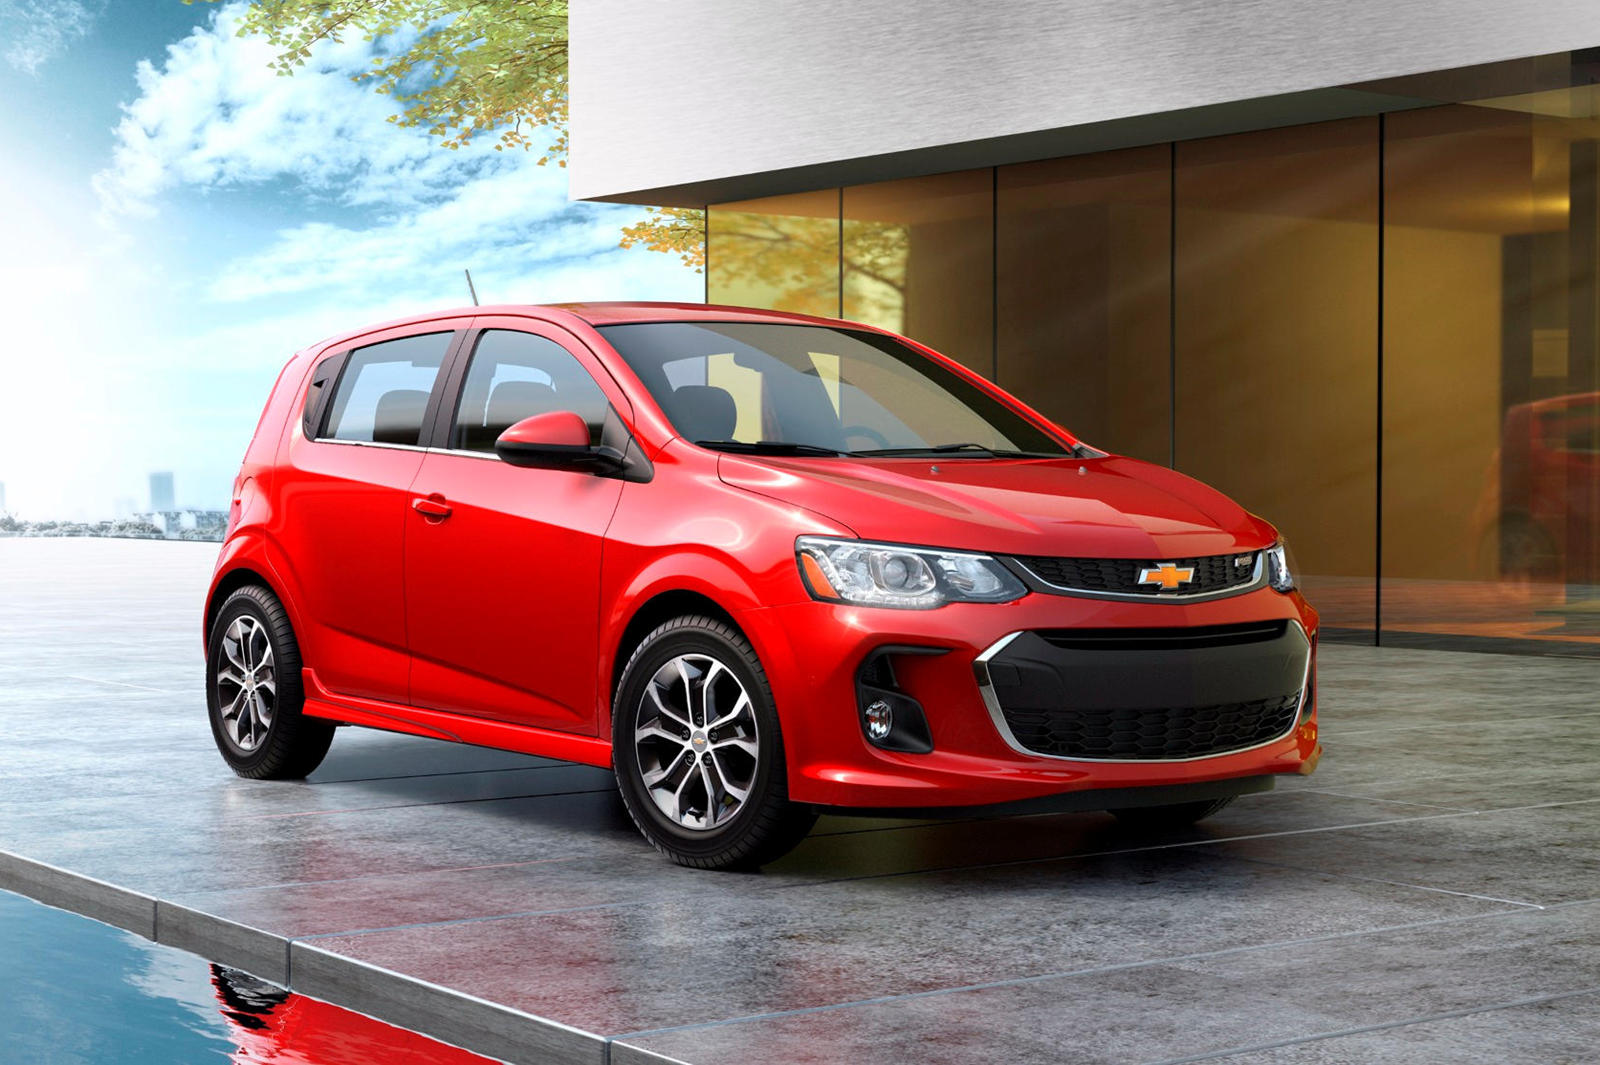 2019 Chevrolet Sonic Hatchback Front Angle View